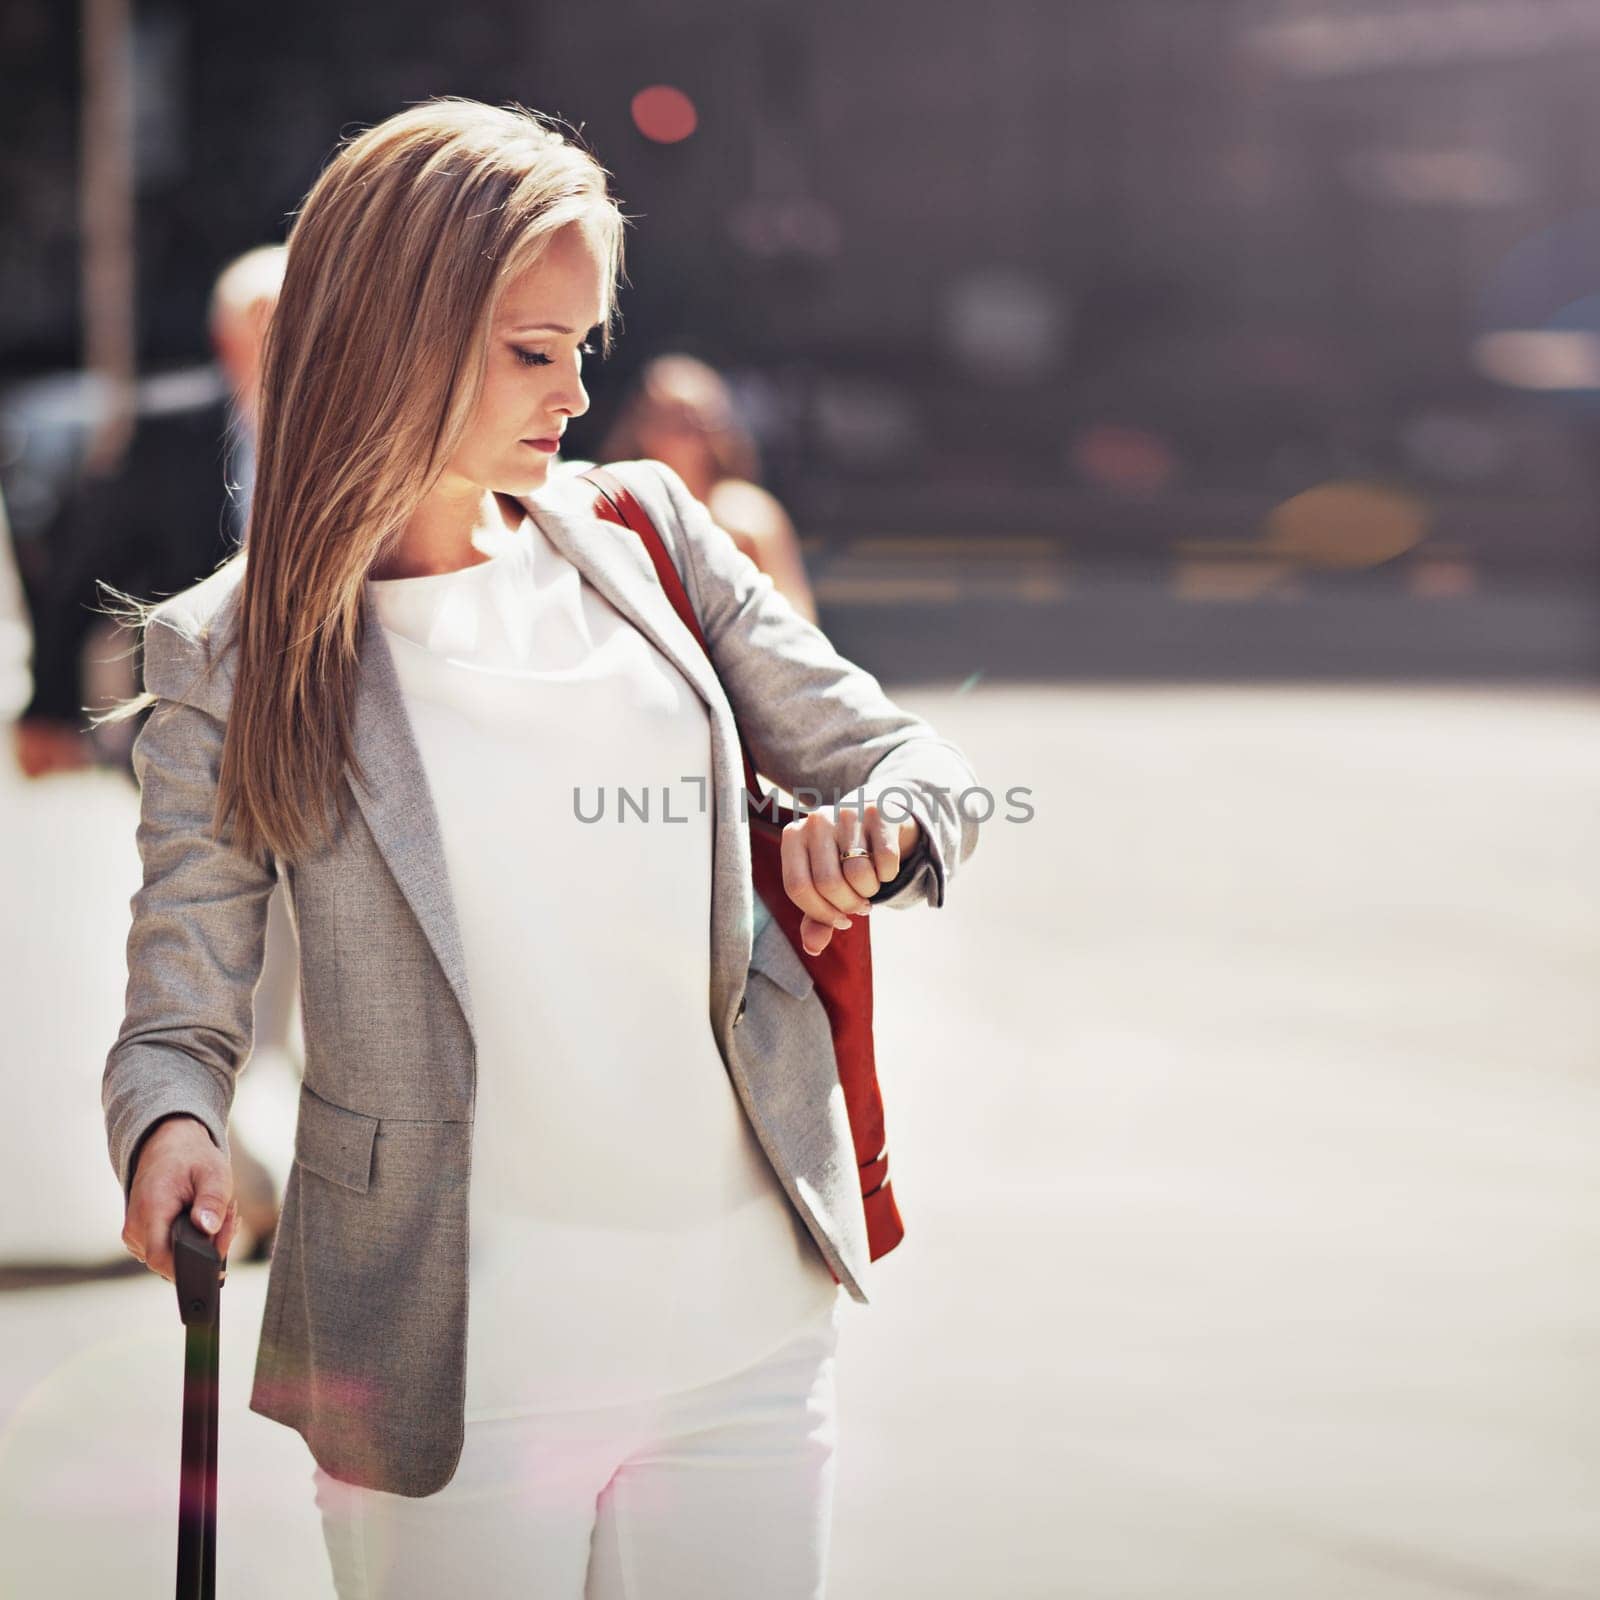 Business, woman and suitcase with watch for travel time management for airplane trip, downtown or city street. Female person, luggage and corporate professional for urban commute, hotel or meeting.